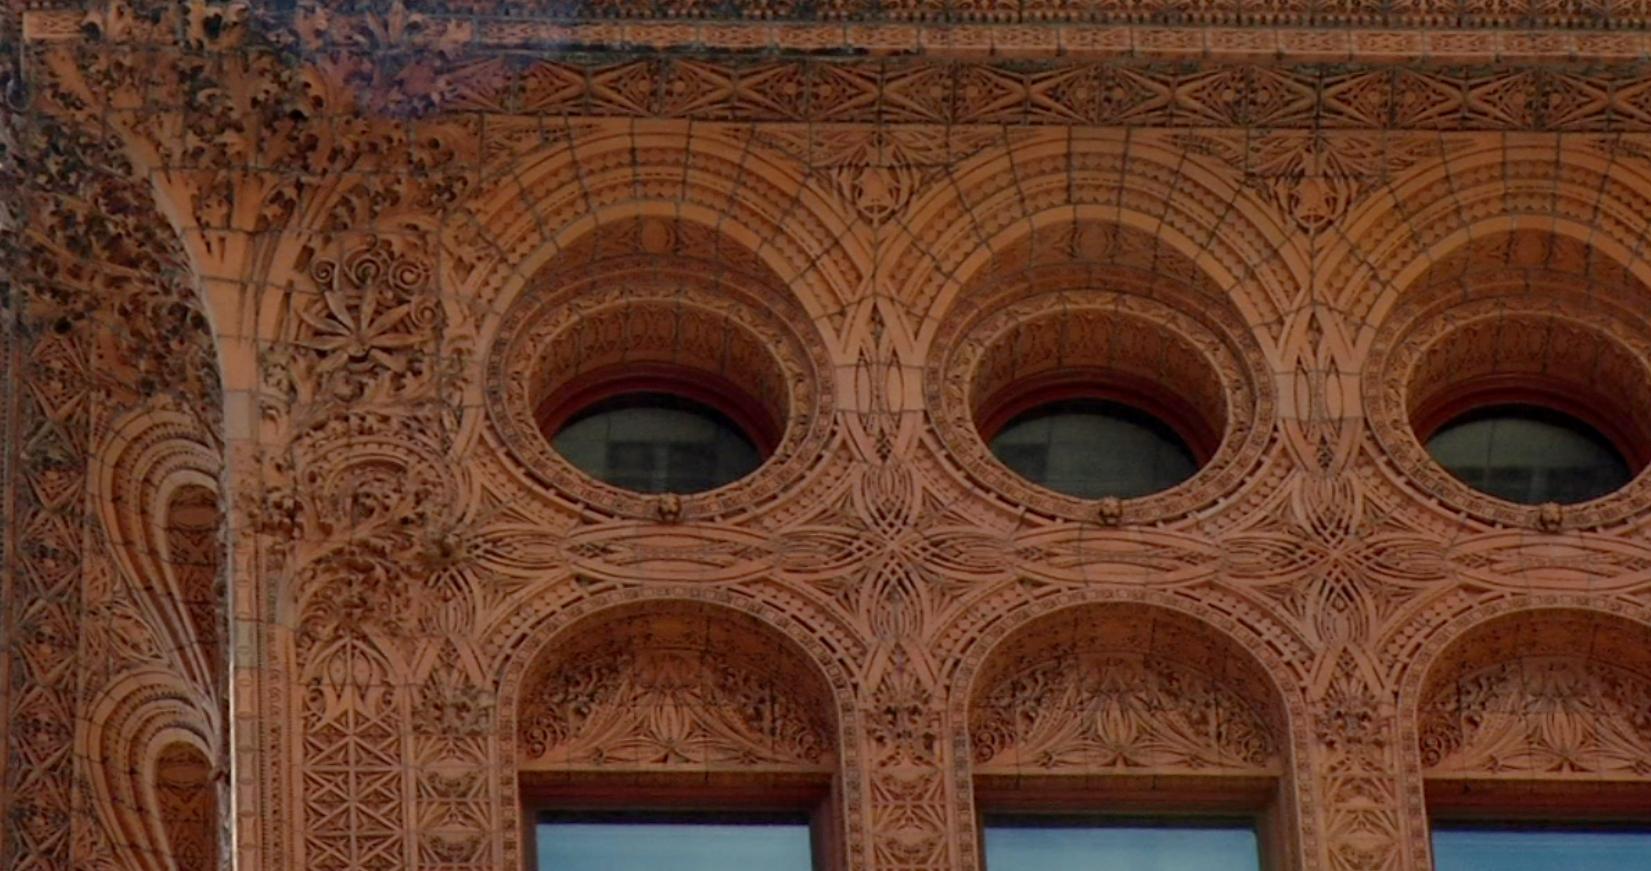 “Louis Sullivan: The Struggle for American Architecture,” recognized at the Kansas City Filmfest in April as Best Documentary Film, will be shown at 11:00 AM and 1:30 PM on Thursday, June 10.